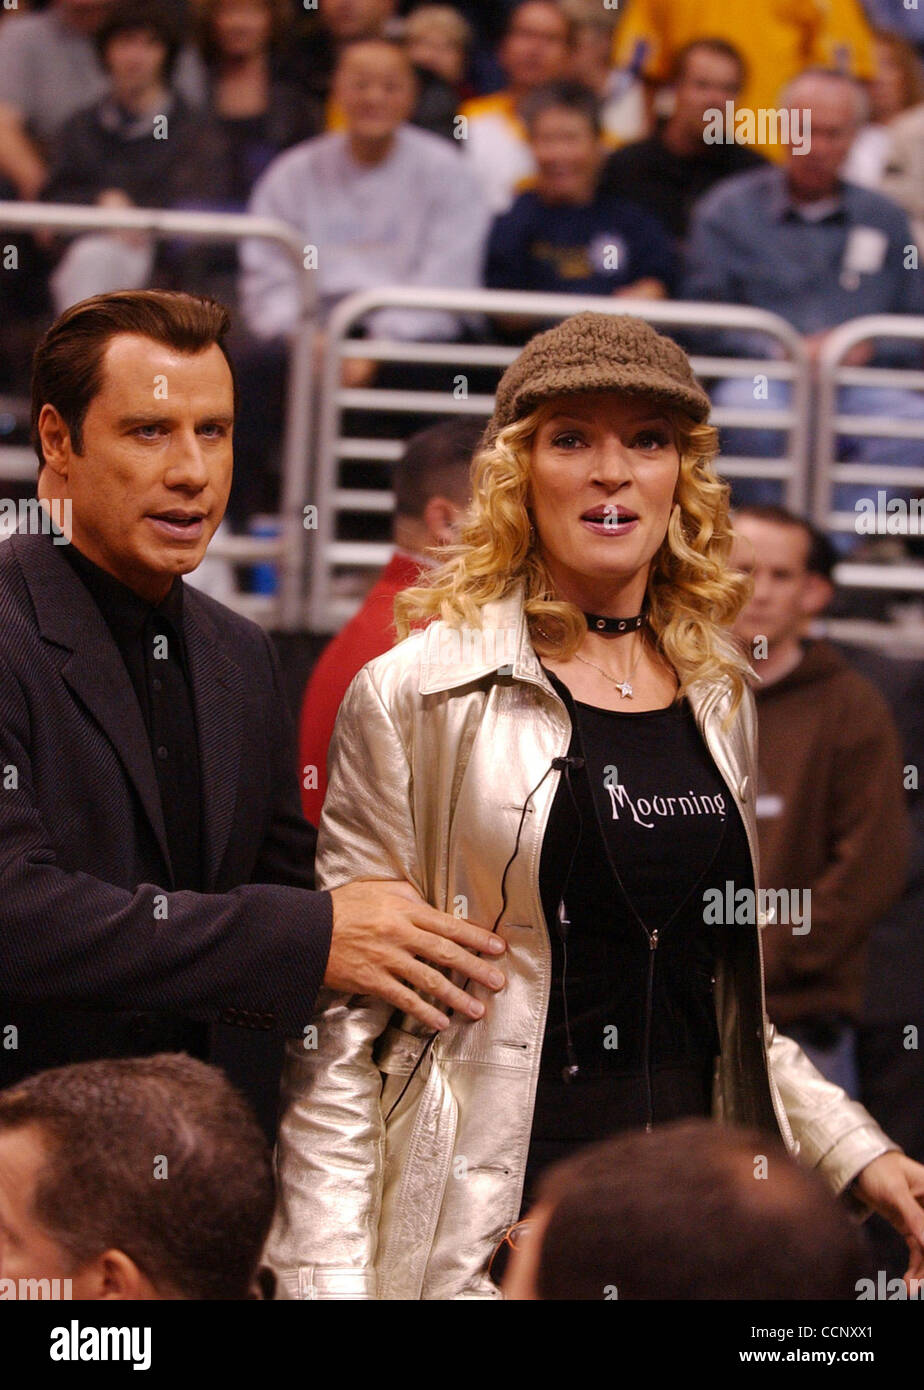 Feb 27, 2004; Los Angeles, CA, USA; Actors JOHN TRAVOLTA, UMA THURMAN and musician Steven Tyler of 'Aerosmith' use Staples Center, during a Los Angeles Lakers game against the Sacramento Kings, as their stage while filming the sequel to 'Get Shortie' called 'Be Cool.' This is the first time John and Stock Photo